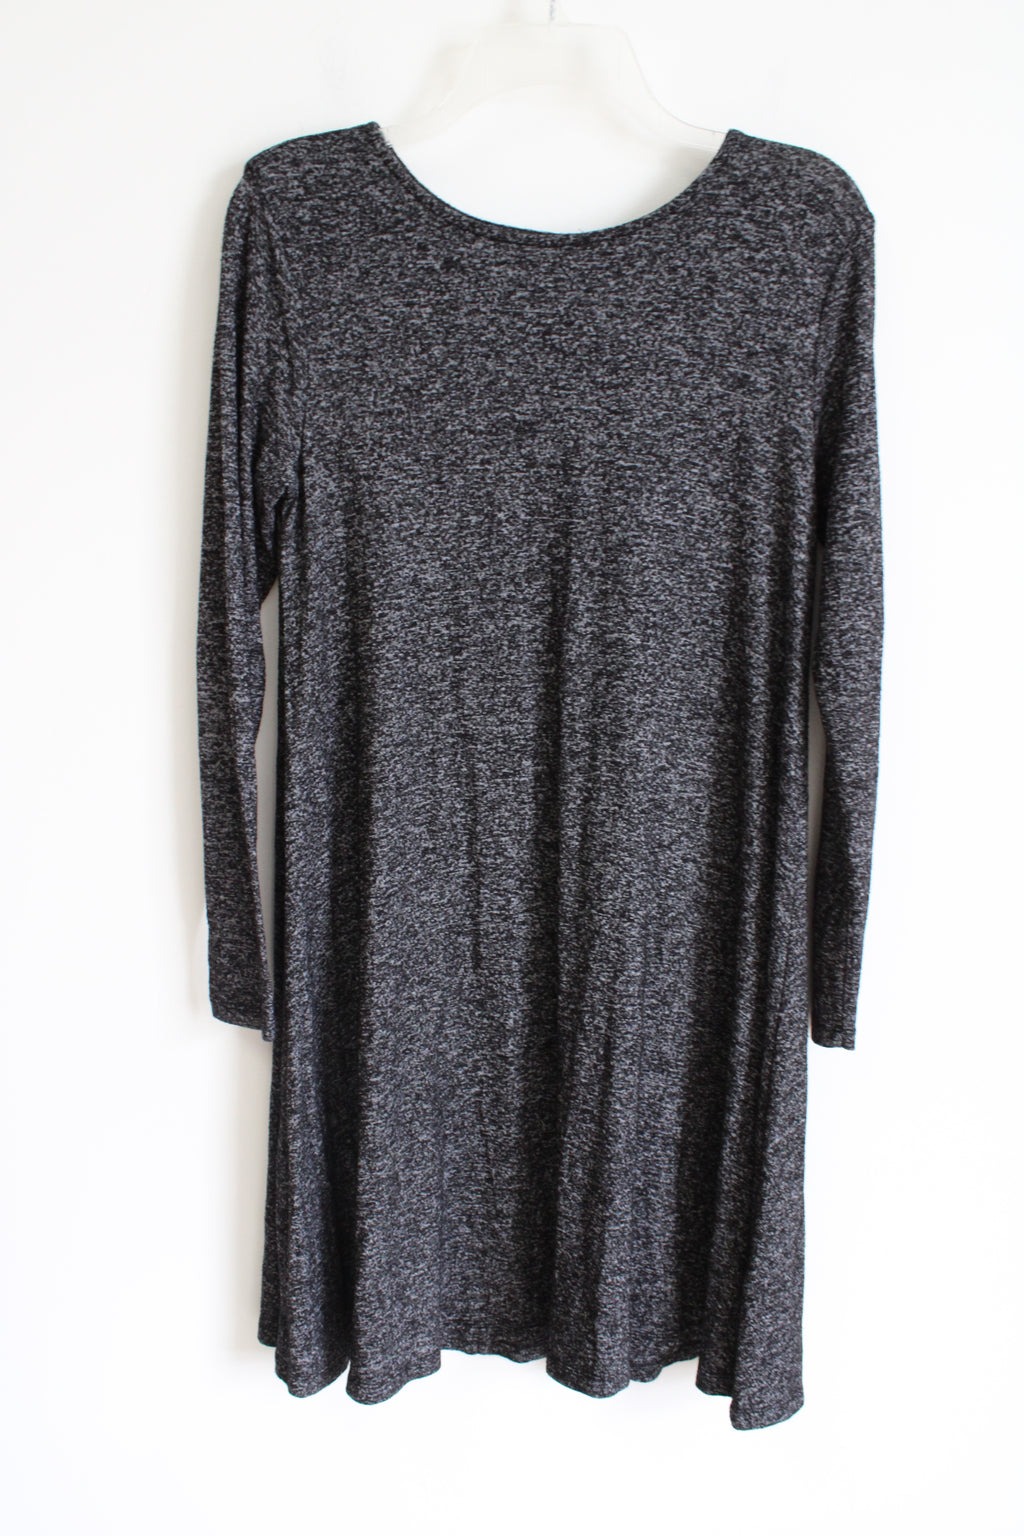 Old Navy Charcoal Gray Heathered Long Sleeved Dress | S